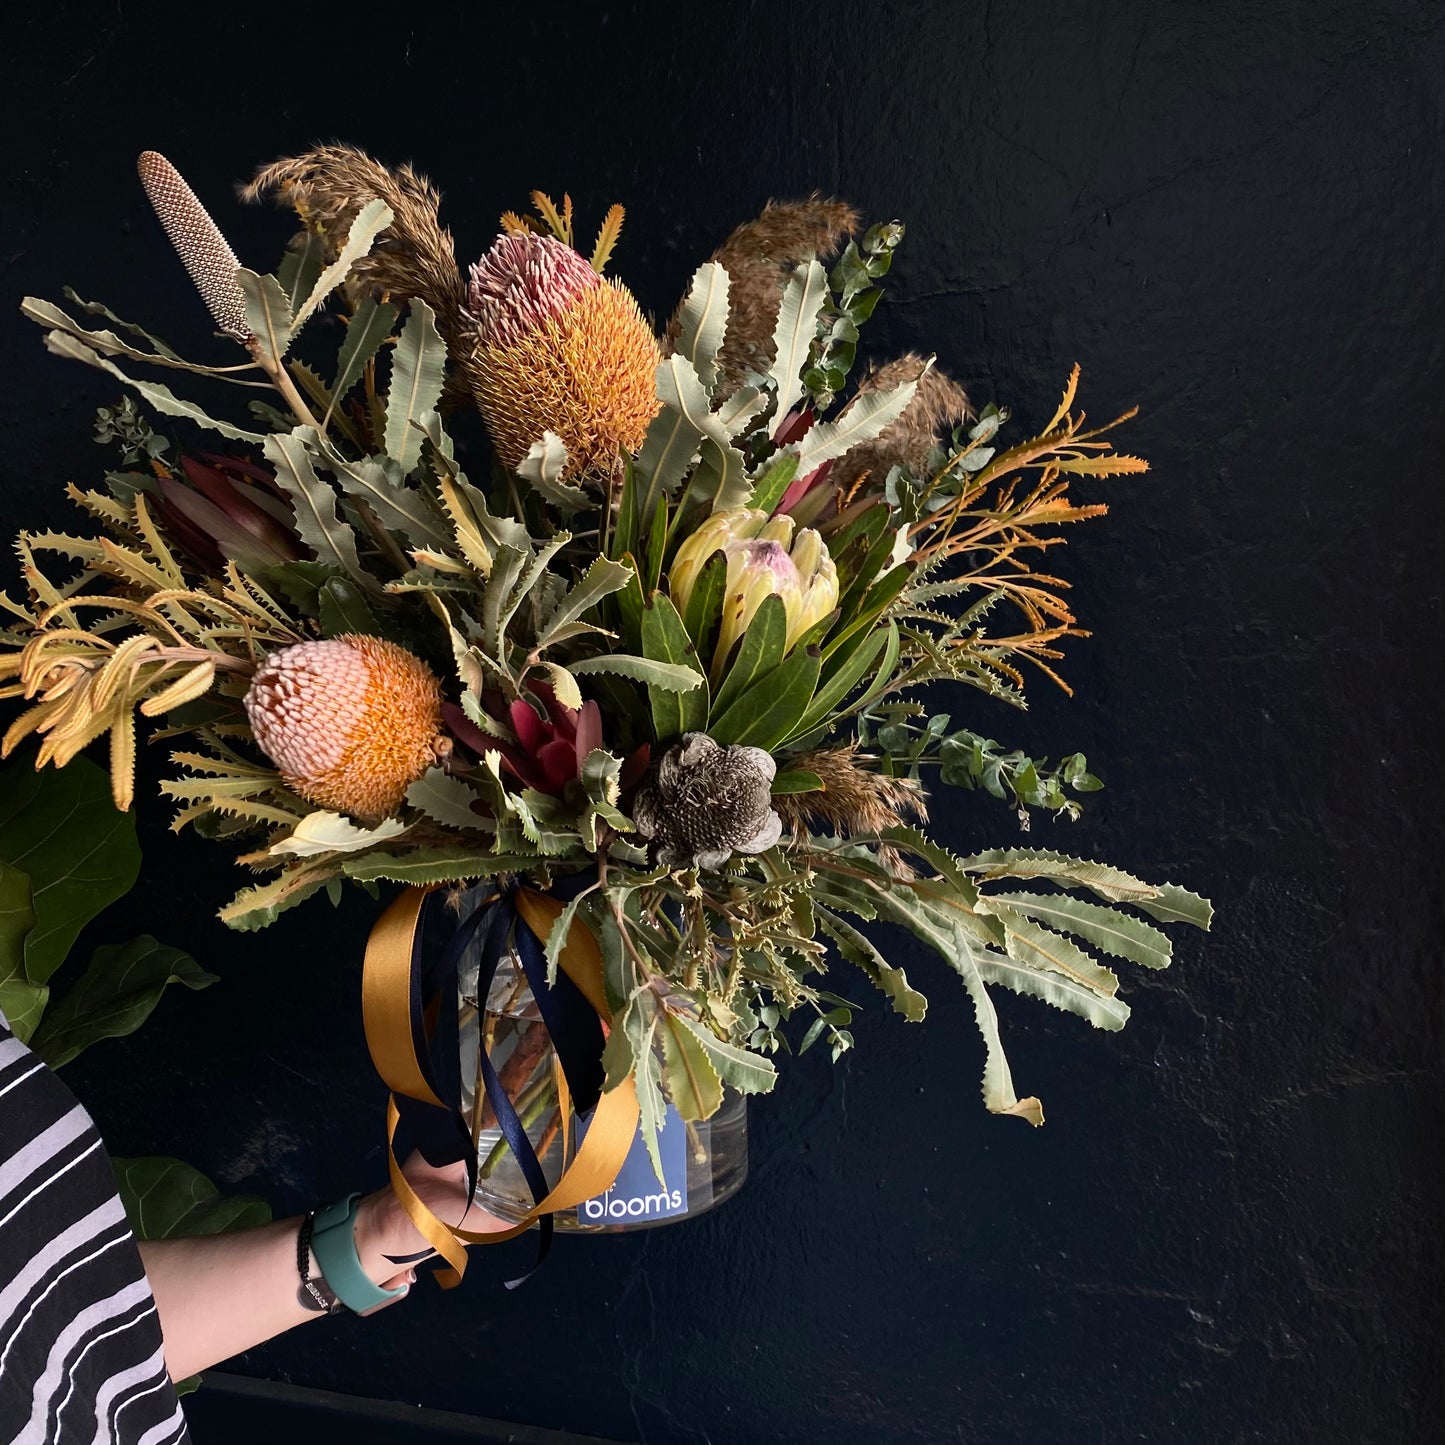 Luxury arrangement of native flower in a glass vase for delivery in the Clare Valley. Blooms include varieties of banksia's and protea's, leucadendrons with complimenting foliage.